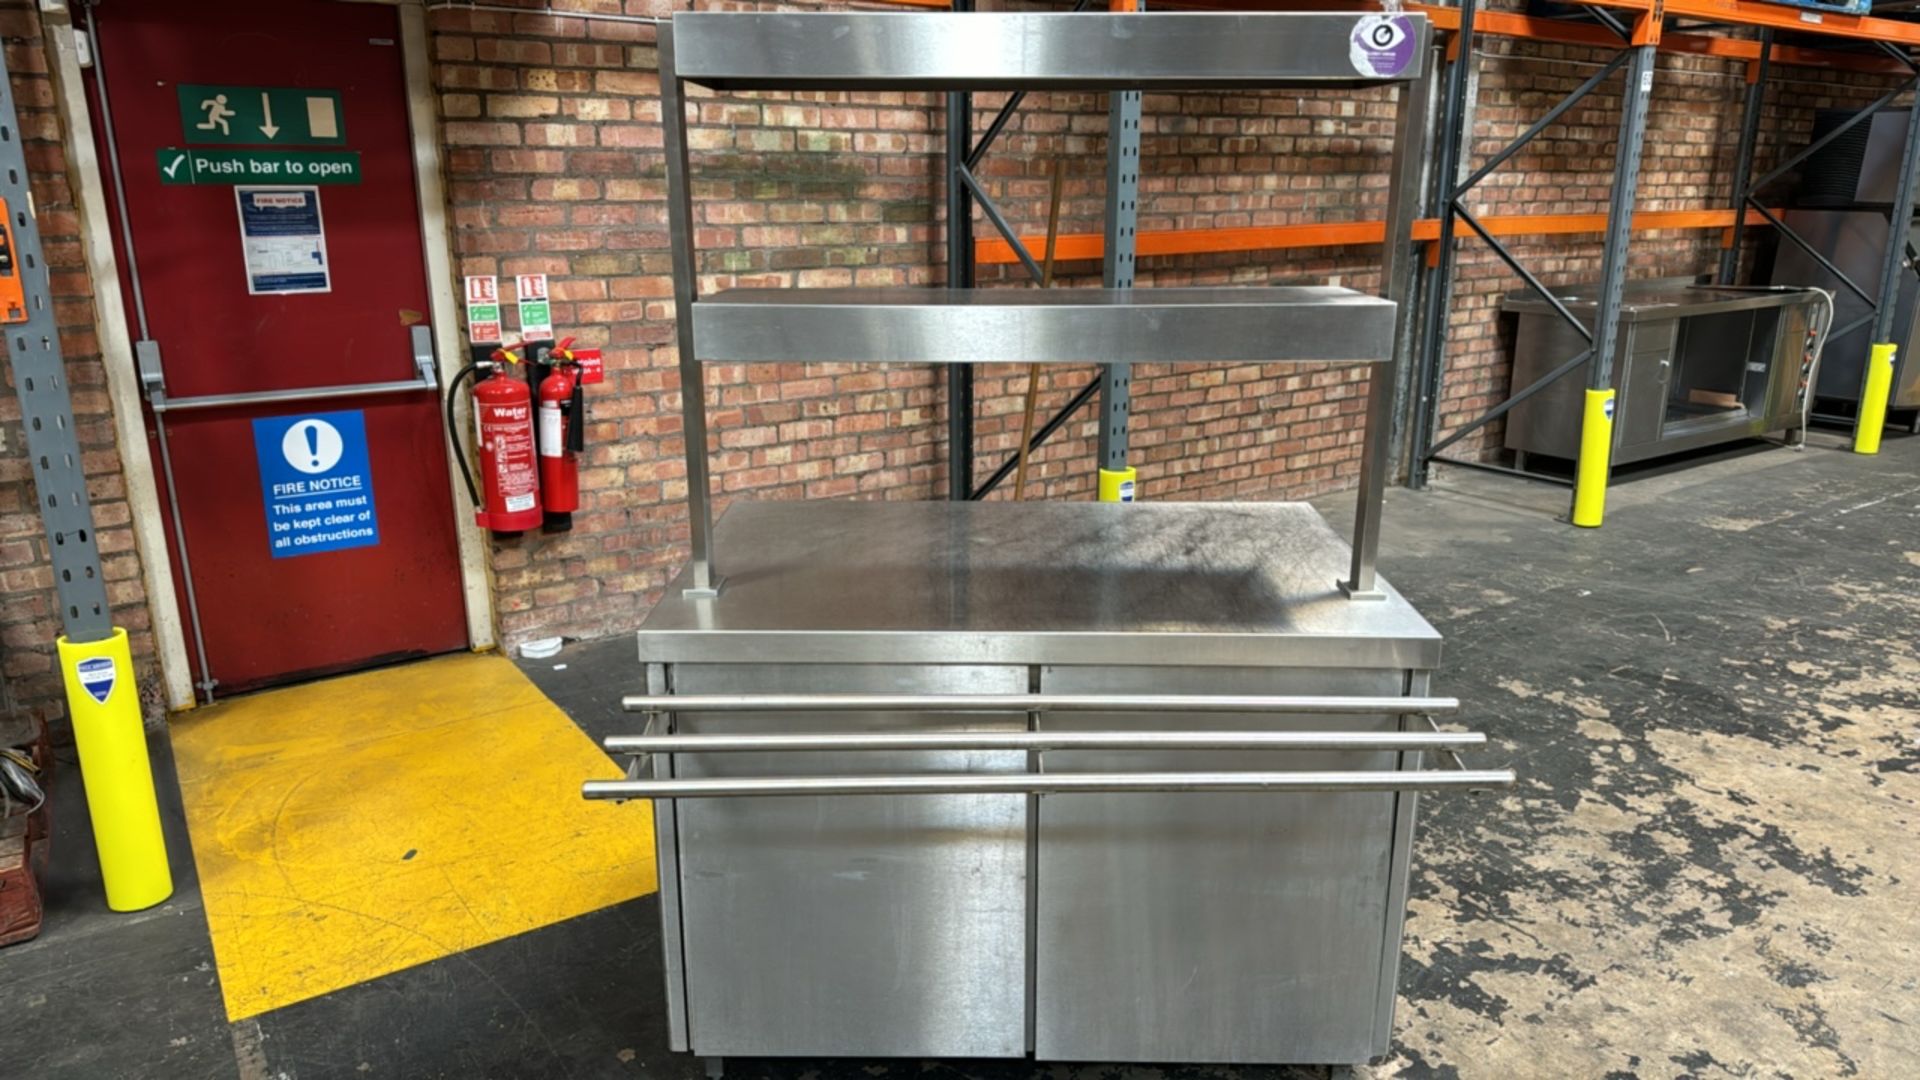 Stainless Steel Serving Counter